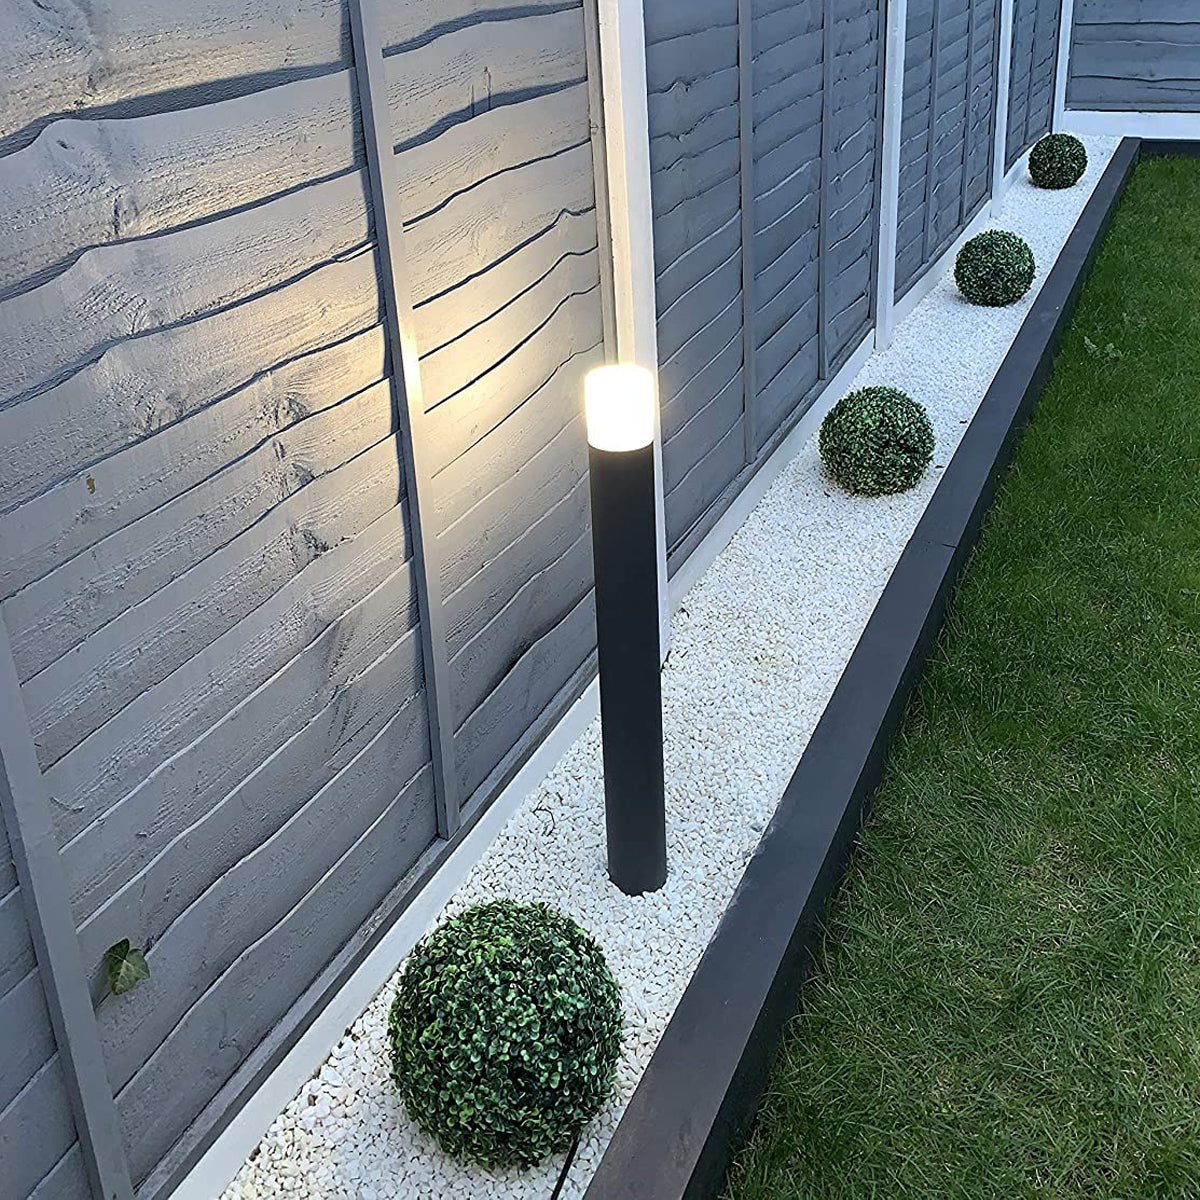 Our Cortez dark grey outdoor post light would look perfect in a modern or more traditional home design. Outside post lights can provide atmospheric light in your garden, at the front door or on the terrace as well as a great security solution. It is designed for durability and longevity with its robust material producing a fully weatherproof and water resistant light.